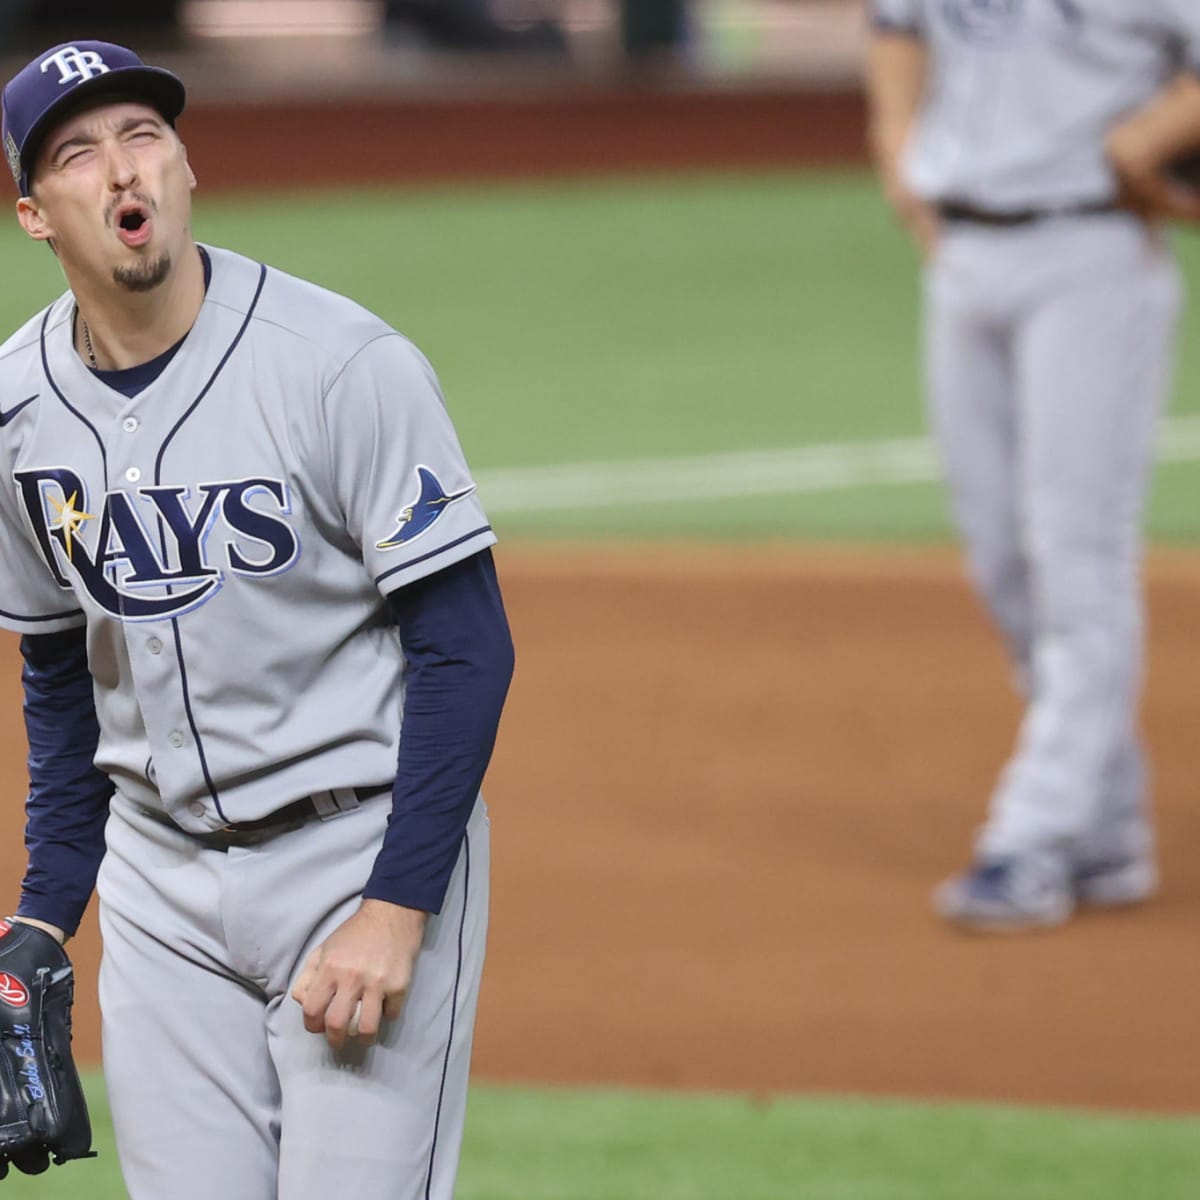 Blake Snell's reaction to being pulled after 5.1 innings : r/baseball